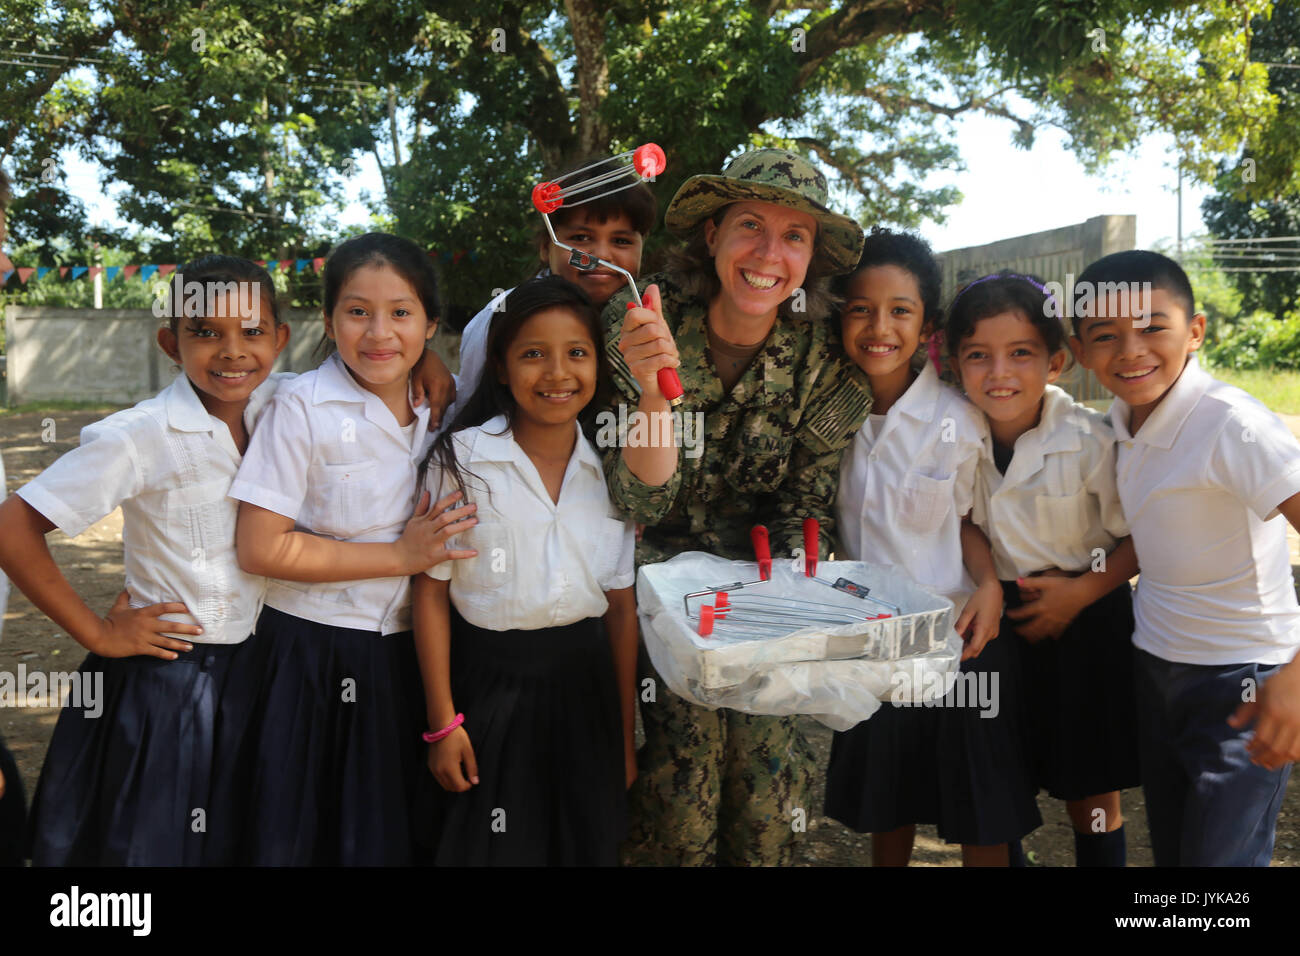 170817-A-QE286-0027 TOCOA, Honduras (August 17, 2017) Cmdr. Rhonda Lizewski, a preventive medicine doctor assigned to the Navy and Marine Corps Public Health Center, poses with students at Claudia Barrera Elementary School, during a Southern Partnership Station 17 community relations project (COMREL). SPS 17 is a U.S. Navy deployment executed by U.S. Naval Forces Southern Command/U.S. 4th Fleet, focused on subject matter expert exchanges with partner nation militaries and security forces in Central and South America. (U.S. Army photo by SPC Judge Jones/Released) Stock Photo